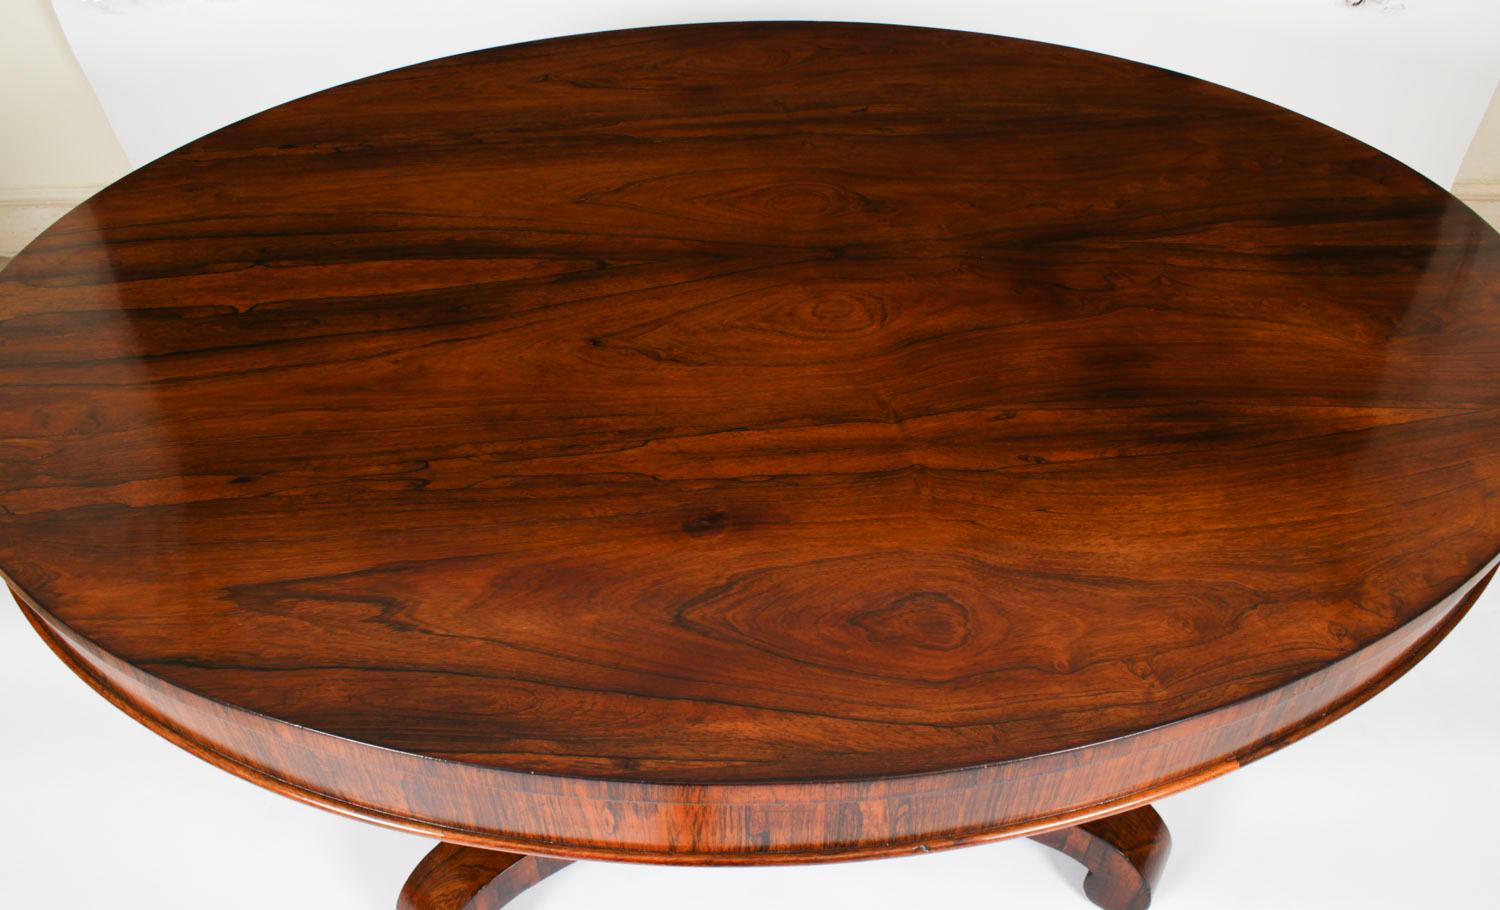 Wood Antique William IV Oval Loo Breakfast Dining Table c.1835 19th Century